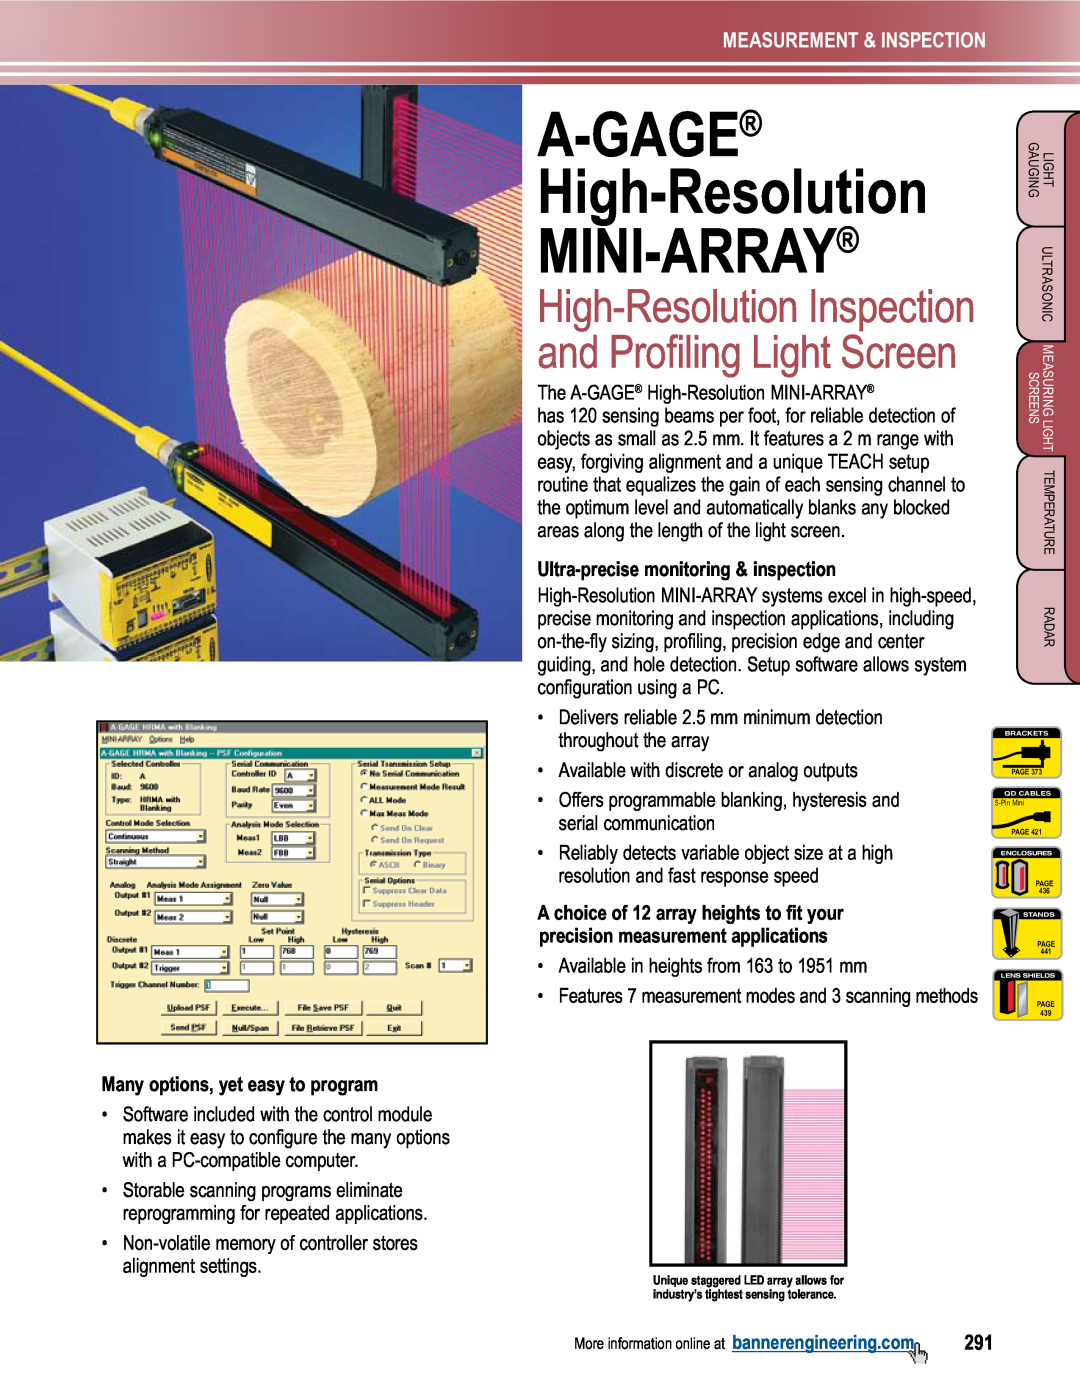 Banner L-GAGE manual A-GAGE High-Resolution MINI-ARRAY, High-Resolution Inspection and Profiling Light Screen 